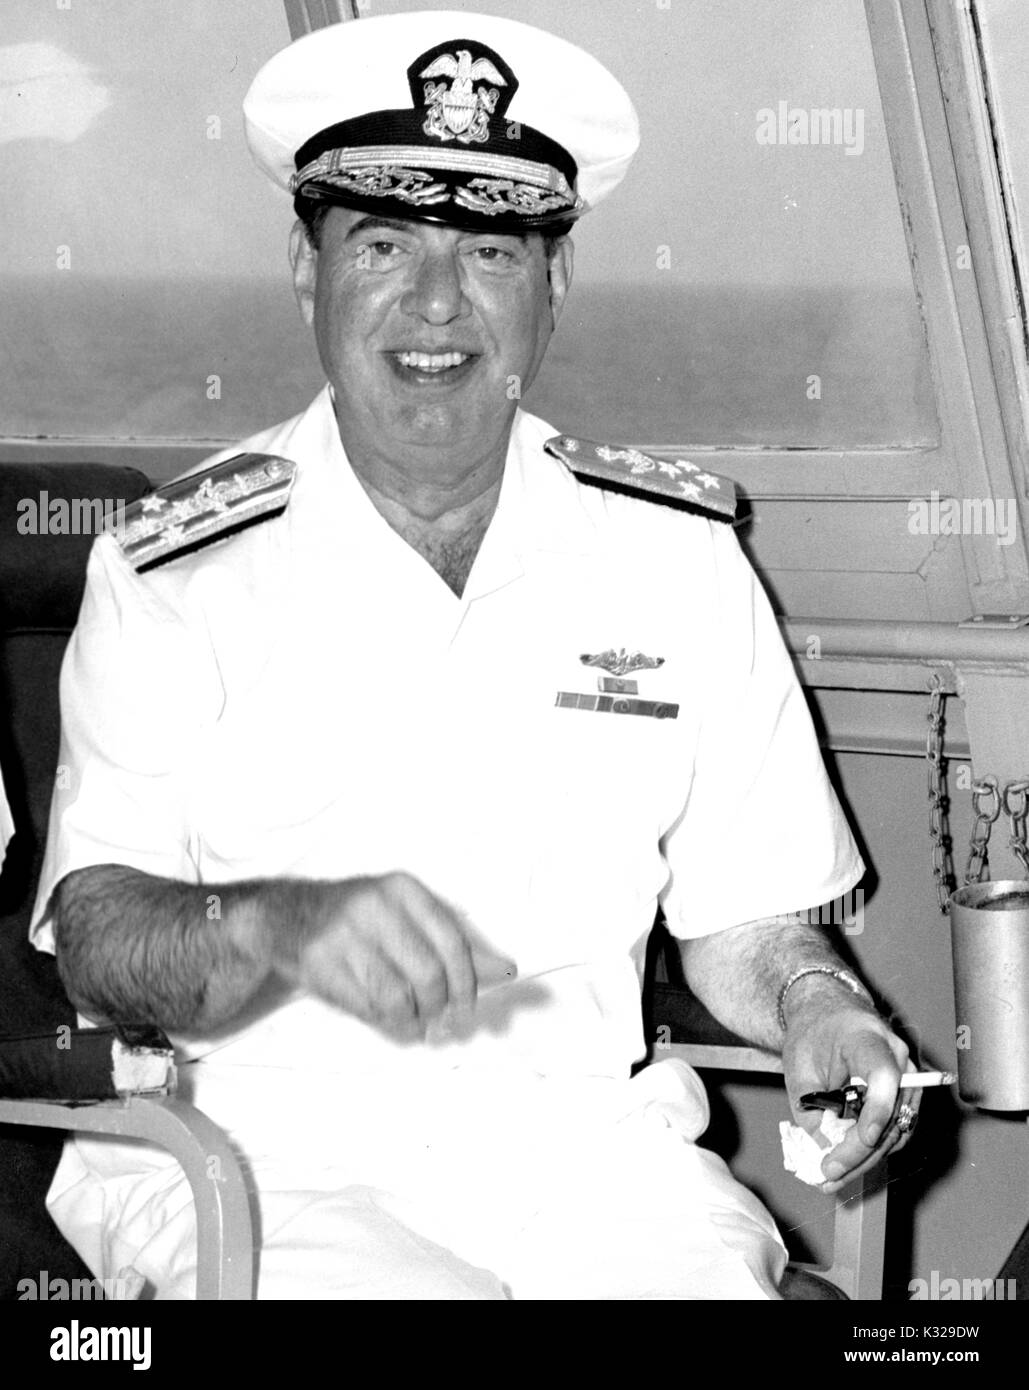 Portrait of Robert Lee Dennison, American naval officer and aide to President Harry Truman, smiling and smoking in uniform on a naval vessel, 1963. Stock Photo